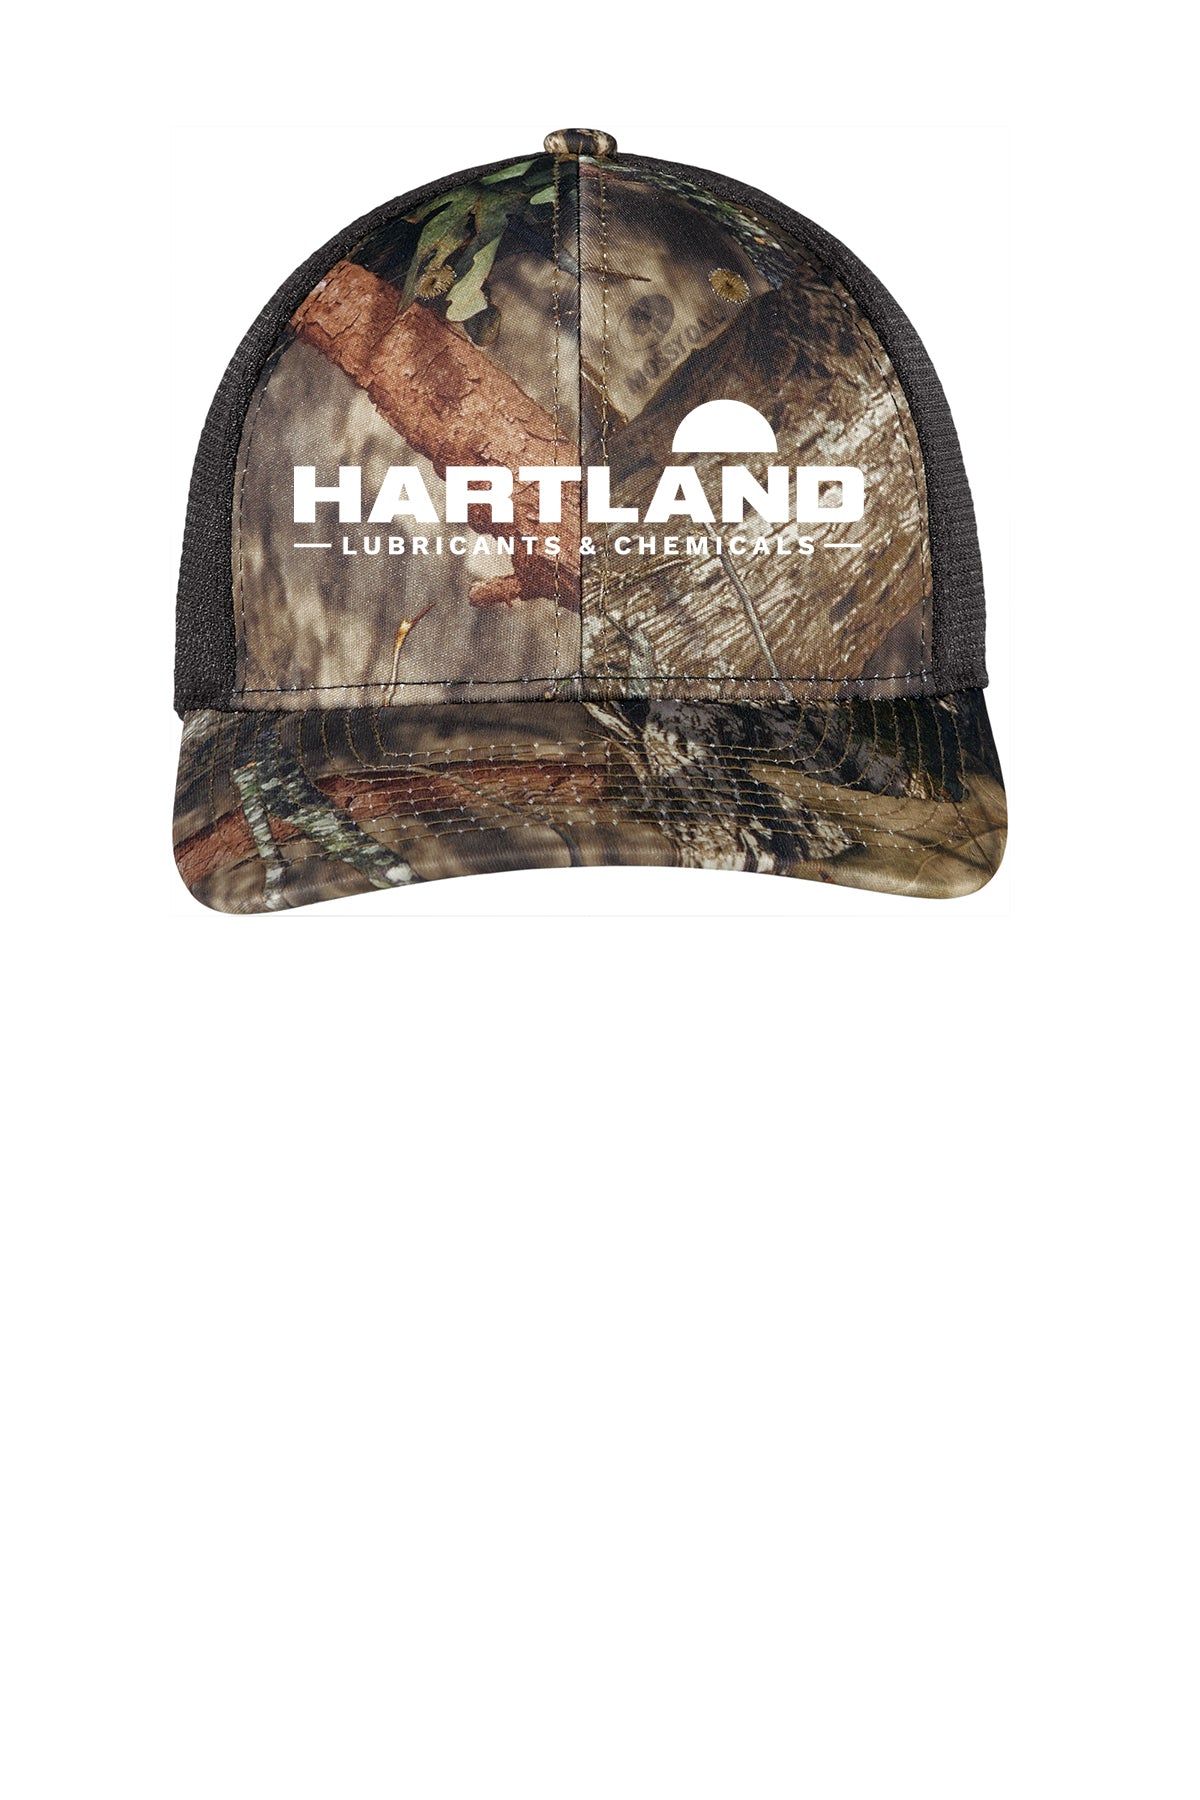 Hartland Lubricants and Chemicals Limited Edition Camo Trucker Cap